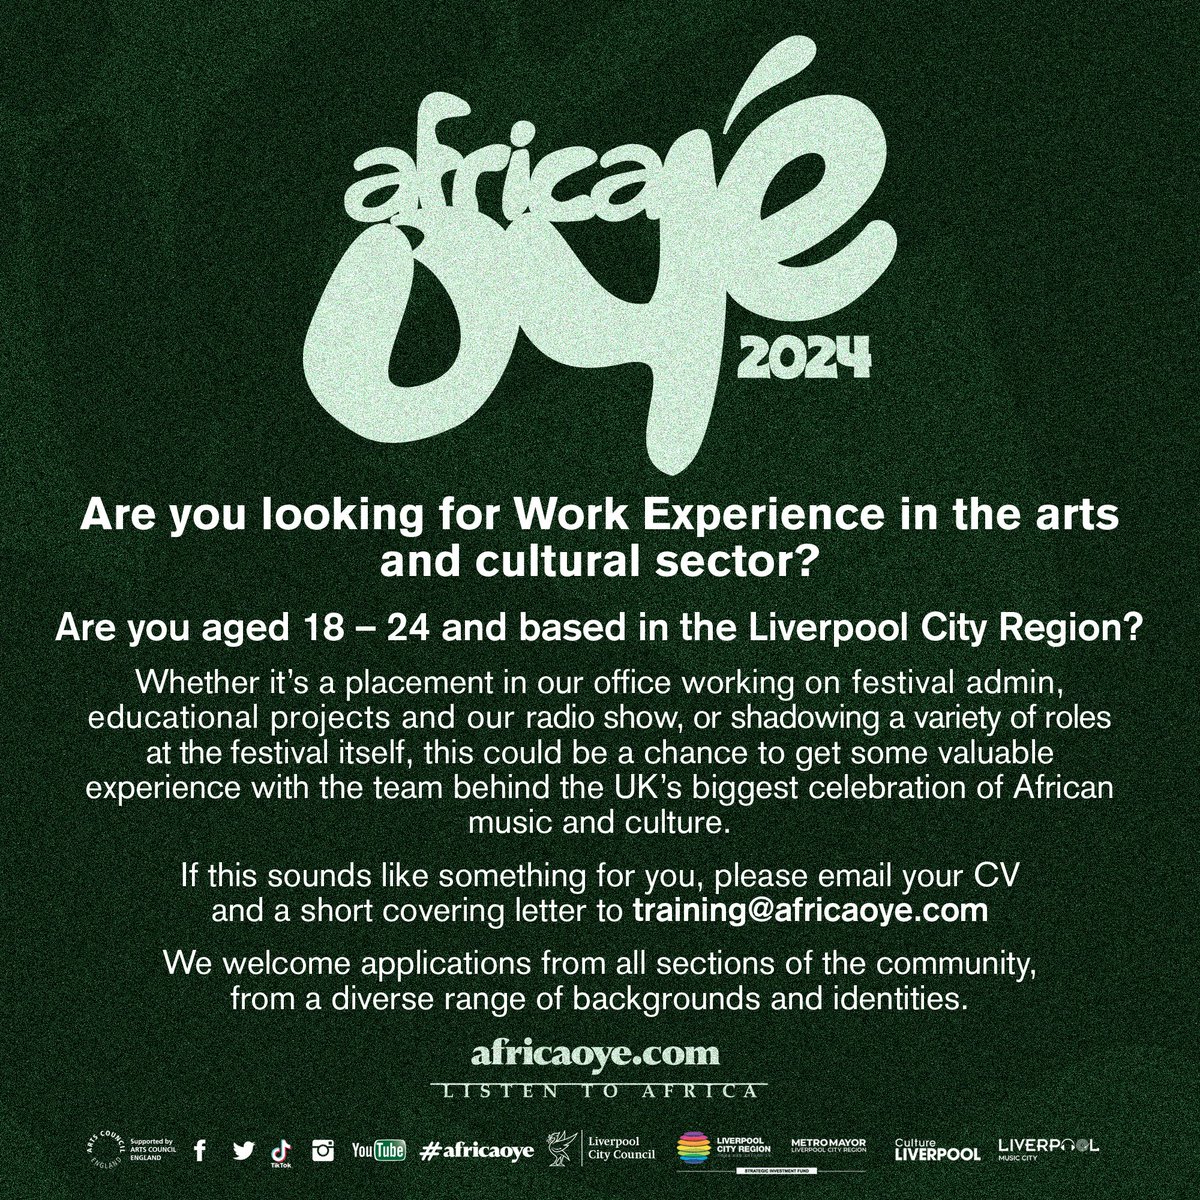 '...we're very conscious that there's a lot of young people who would like to get into the 'behind the scenes' of the music & events industry that don't know where to start.' - Paul Duhaney (Artistic Director at Africa Oyé) Find out more: tinyurl.com/34zb4fty #AfricaOyé